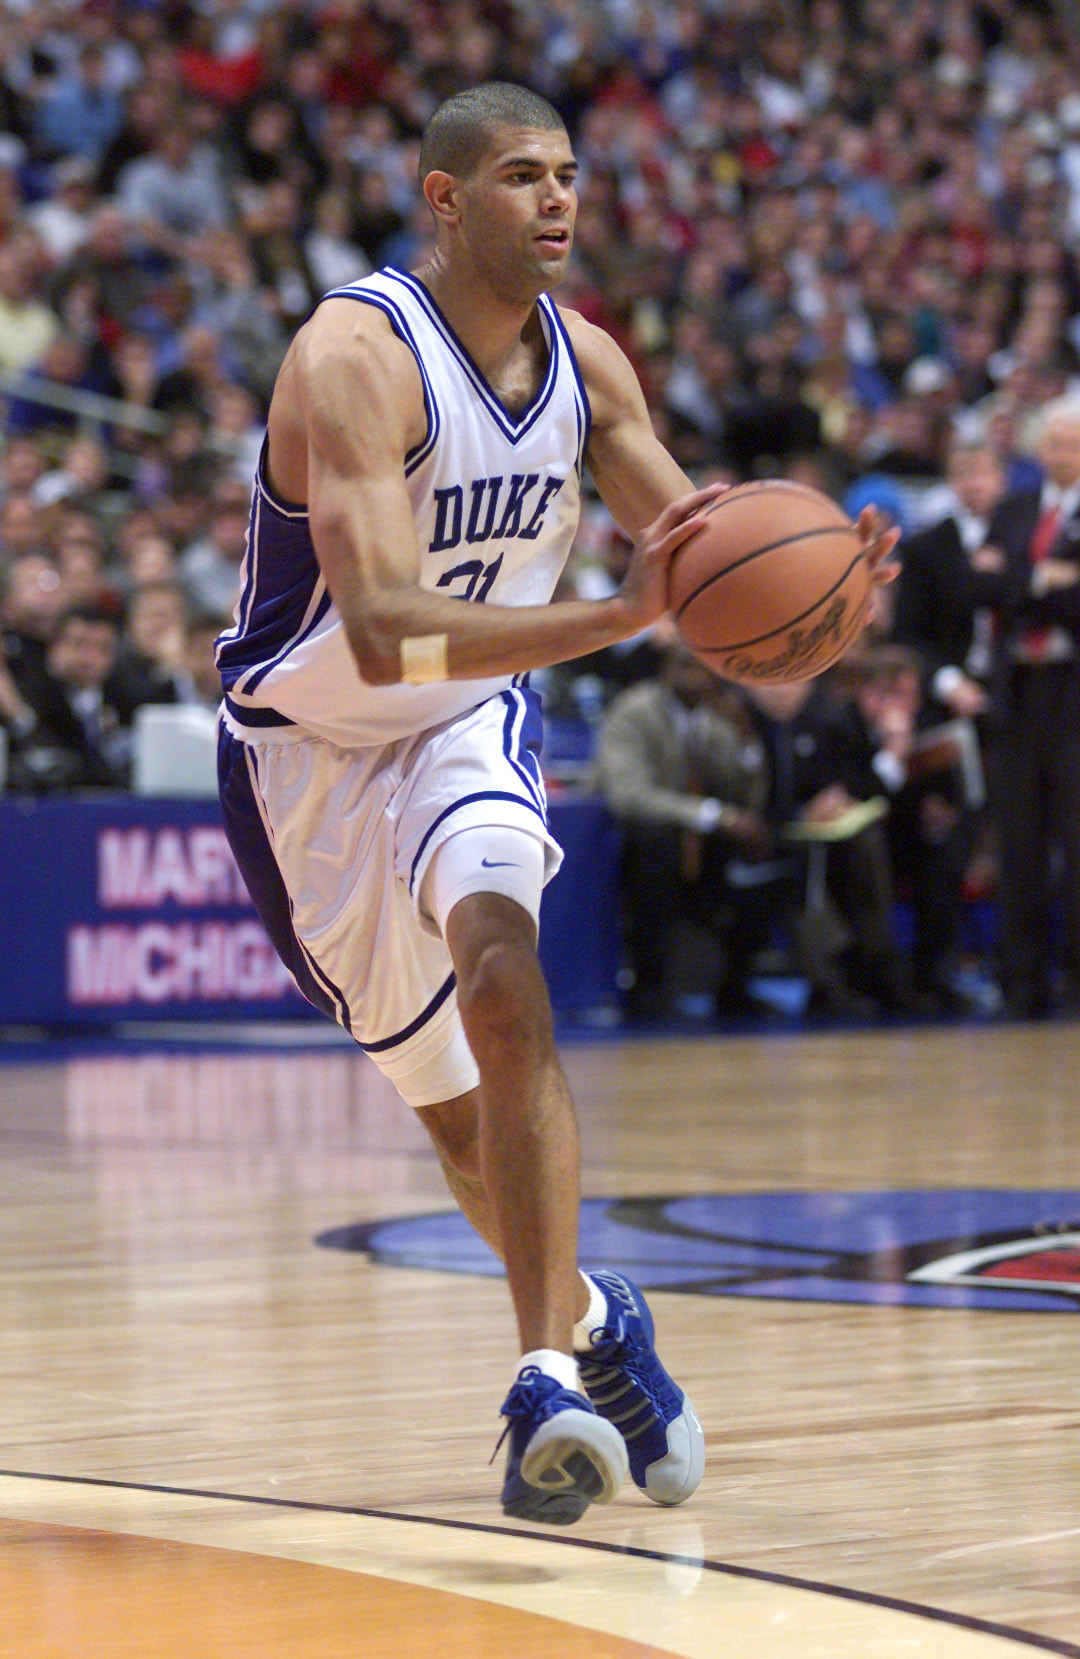 2 Apr 2001:  Shane Battier #31 of Duke looks for an open pass against the Arizona defense during the NCAA National Championship Game of the Men's Final Four tournament at the Metrodome in Minneapolis, Minnesota.  DIGITAL IMAGE. Mandatory Credit: Brian Bah